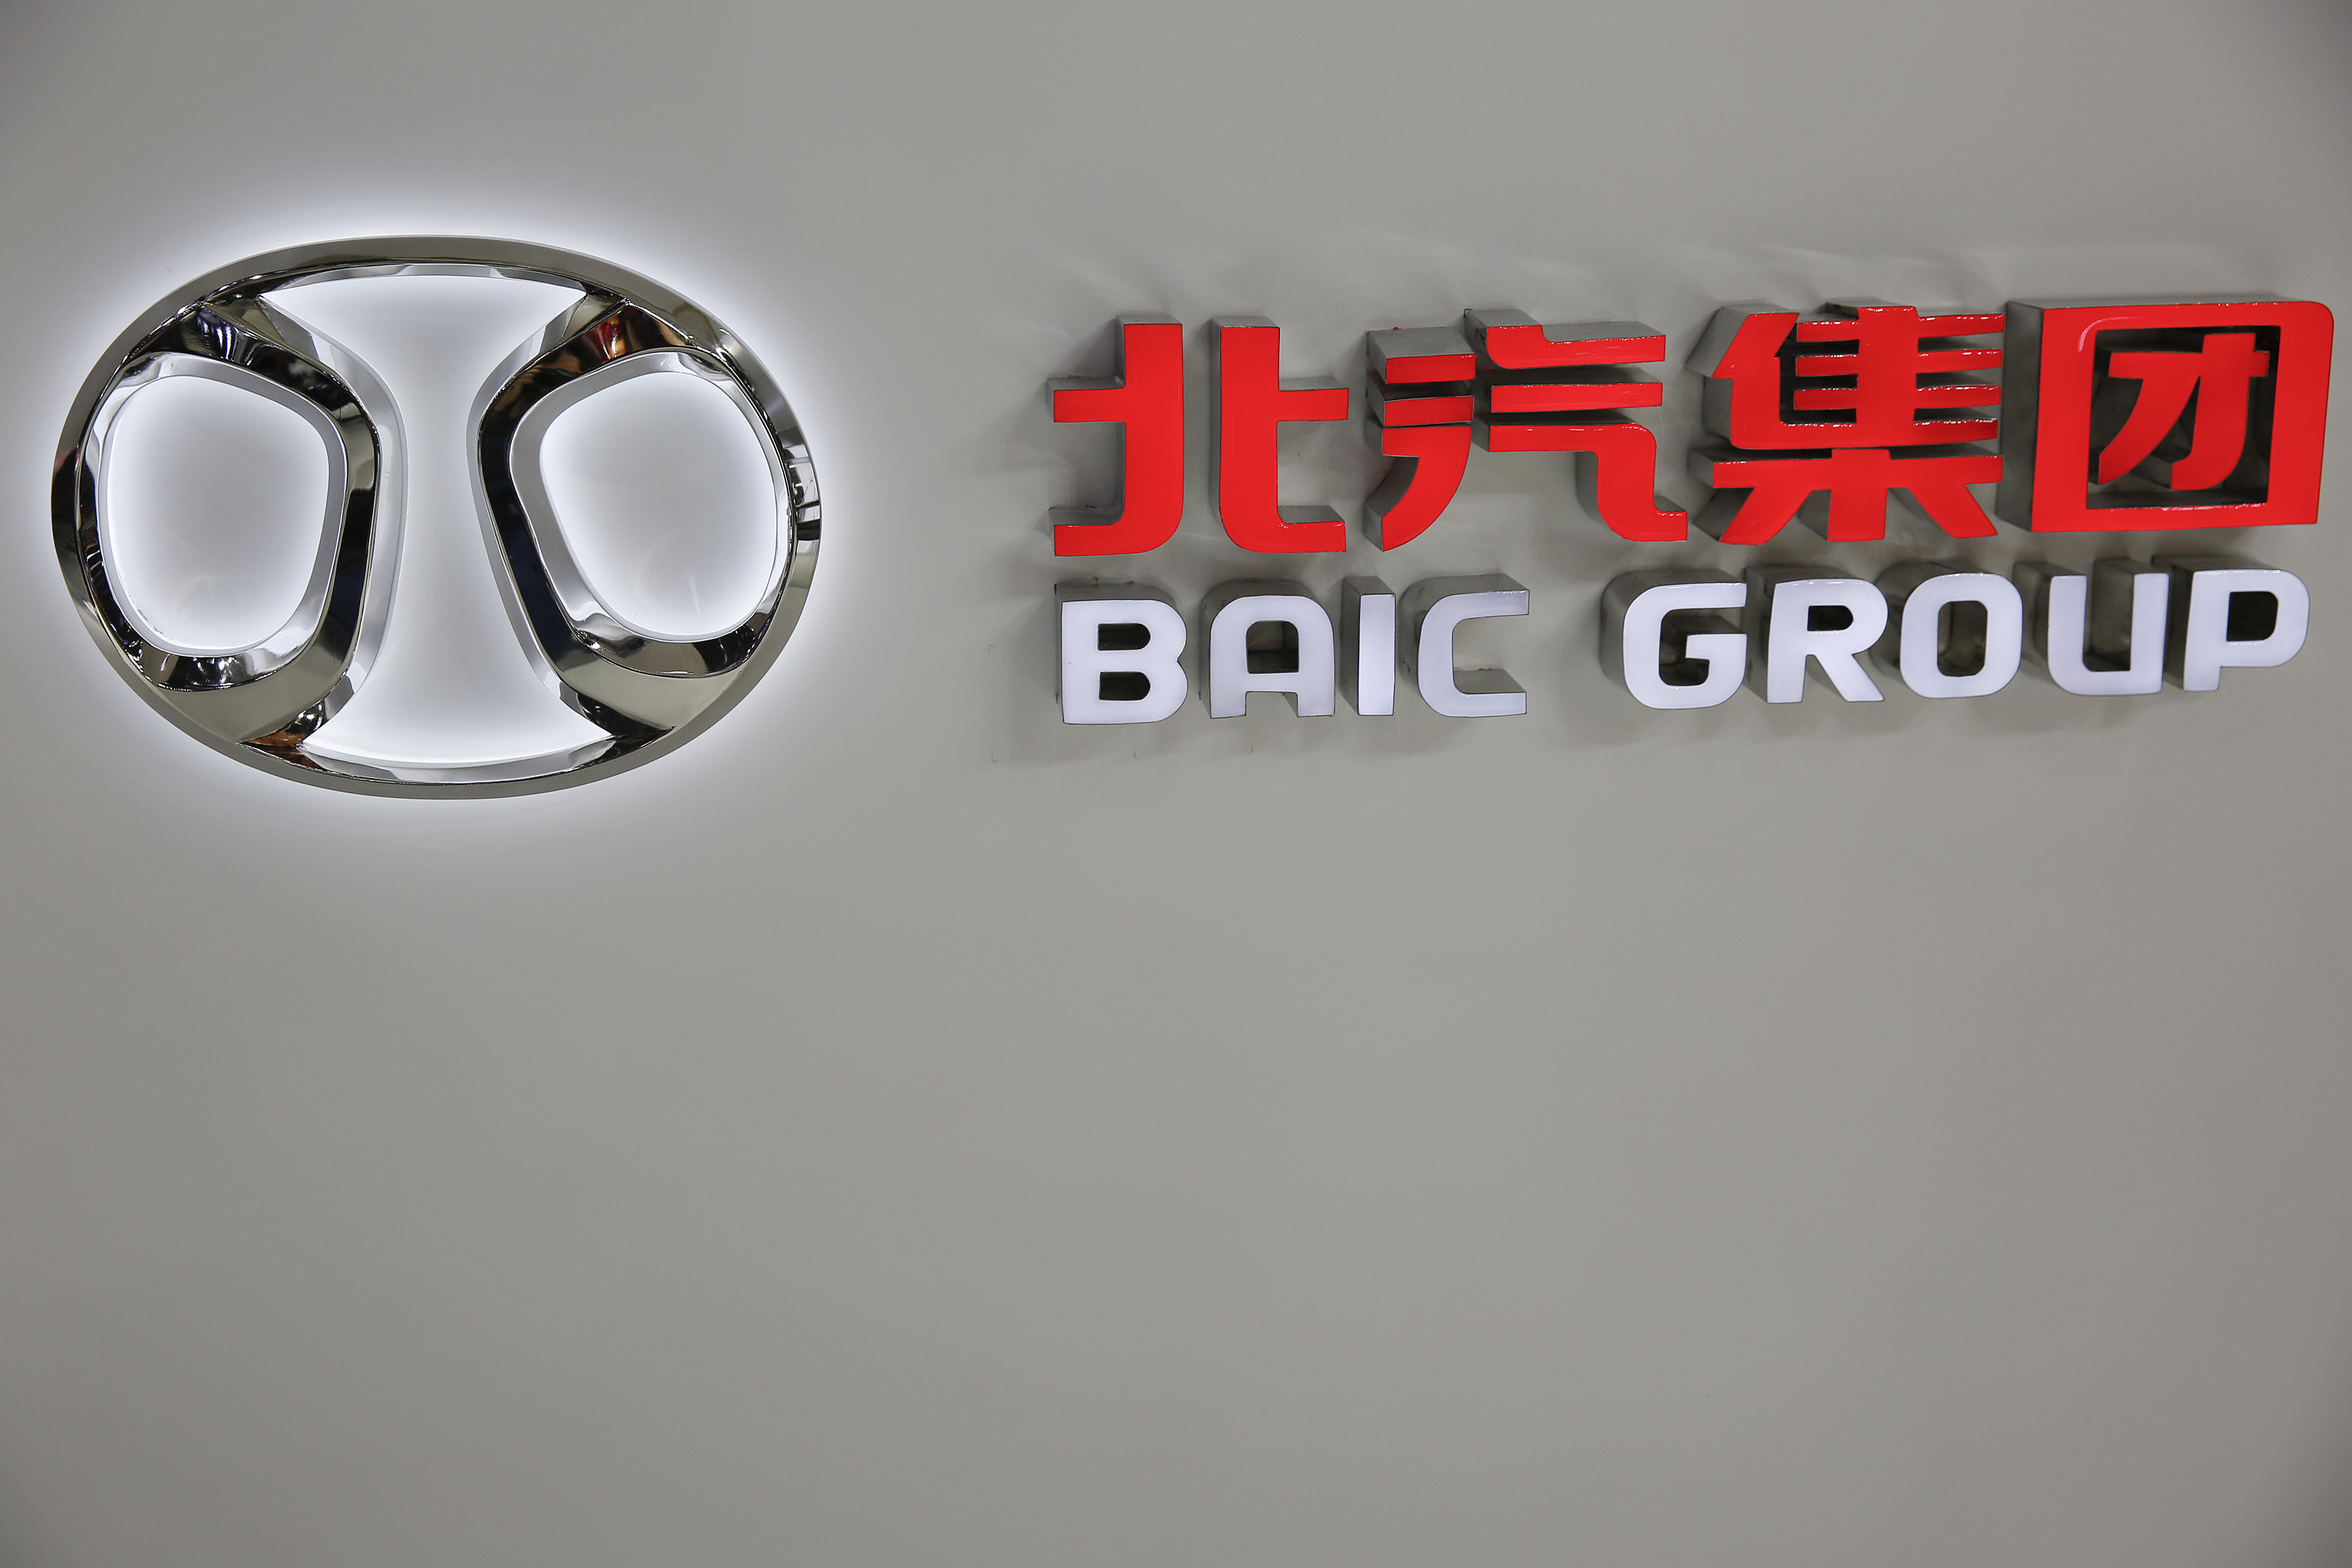 The logo of Beijing Automotive Group (BAIC) is seen during the Auto China 2016 auto show in Beijing